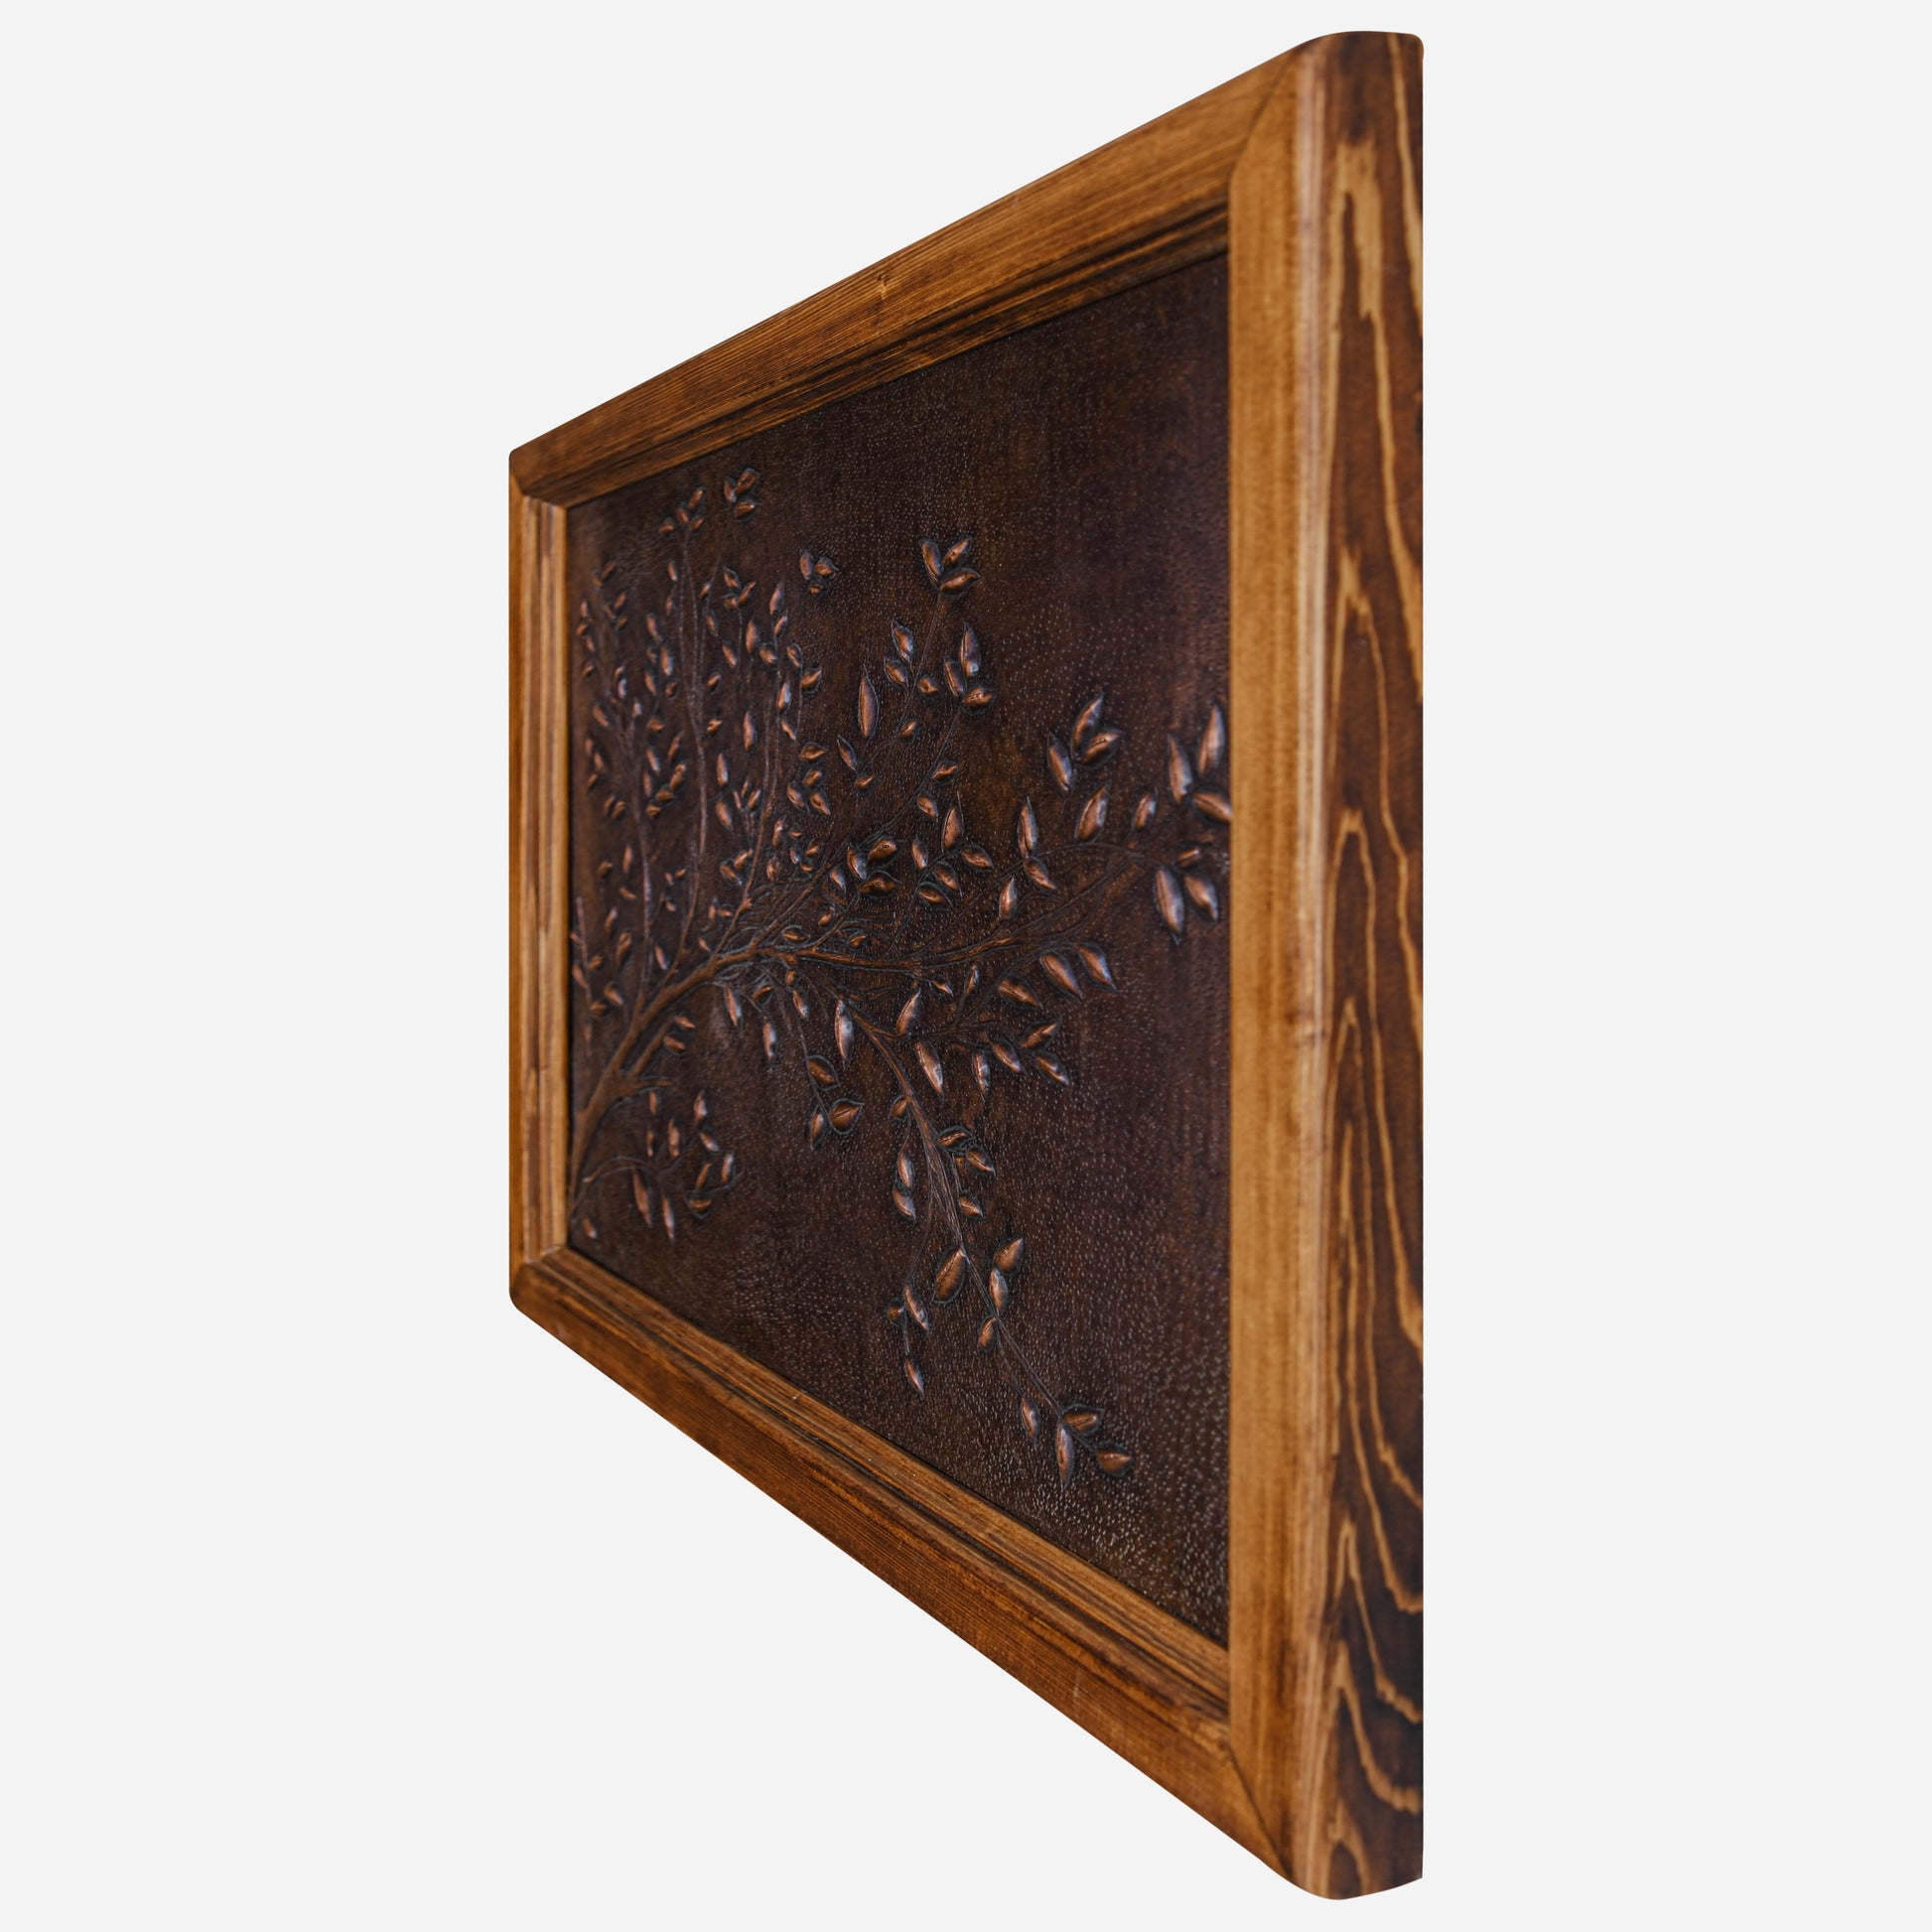 Framed Copper Artwork (Tree Branches, Brown Patina)